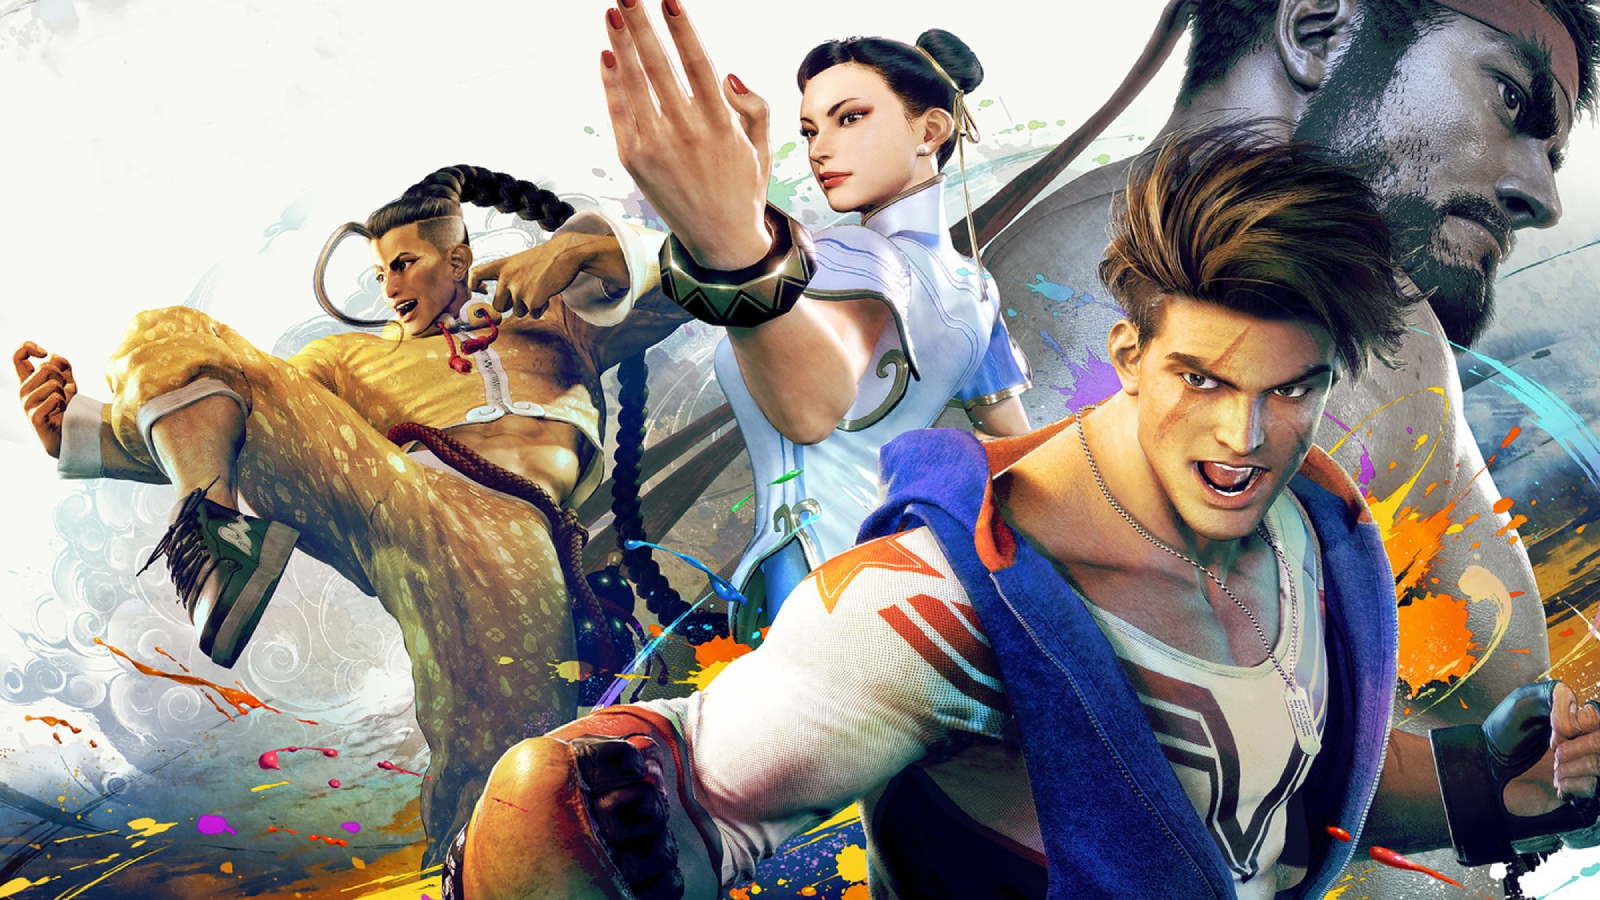 Street Fighter 6 for Xbox, PC: Trailer, characters, and everything you need  to know